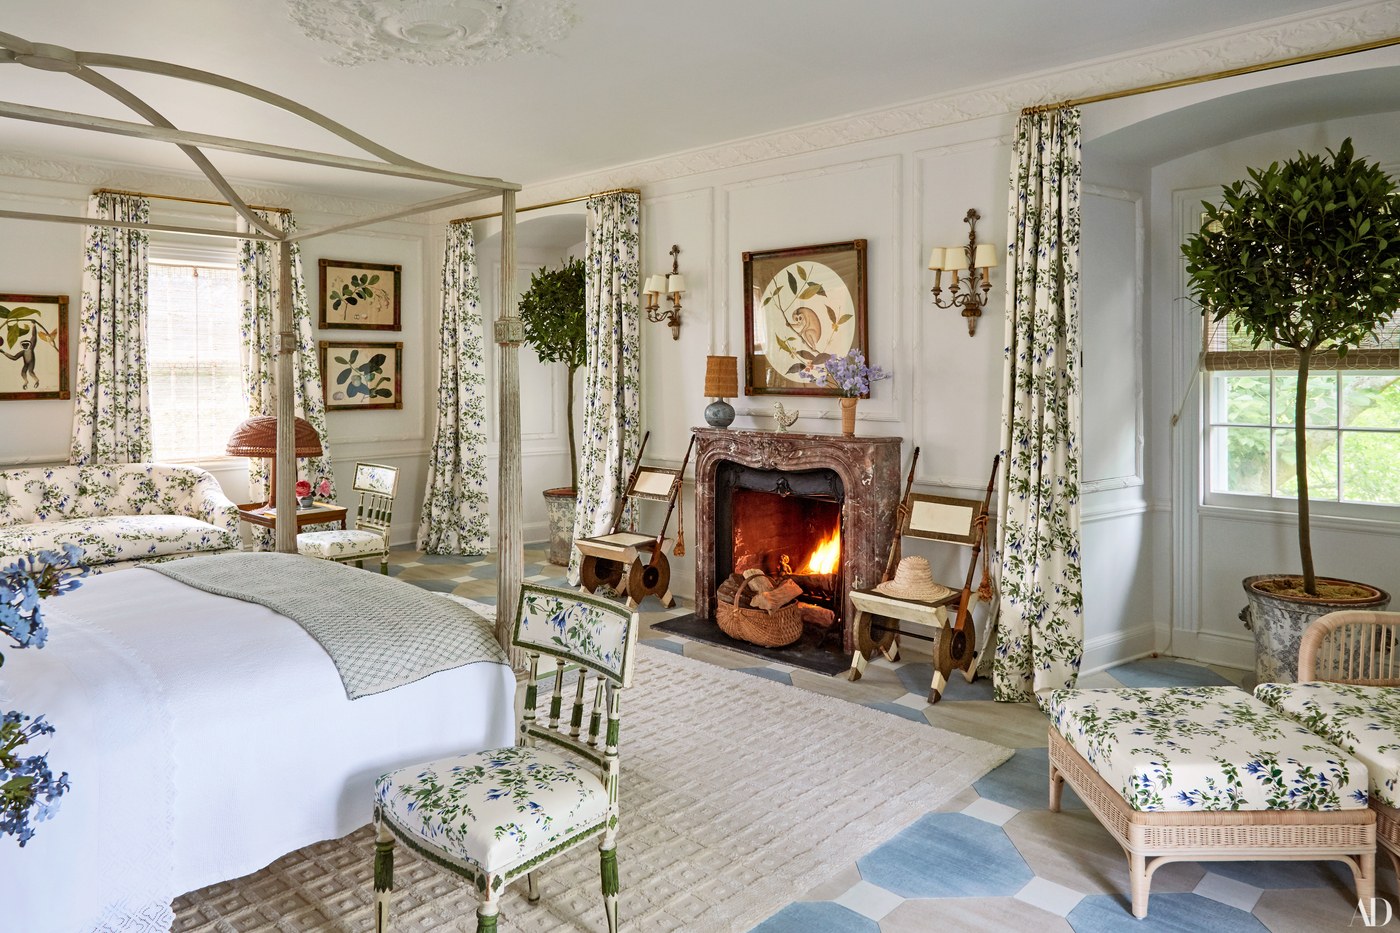 Tory Burch Southampton Bedroom in Colefax and Fowler Floral via AD